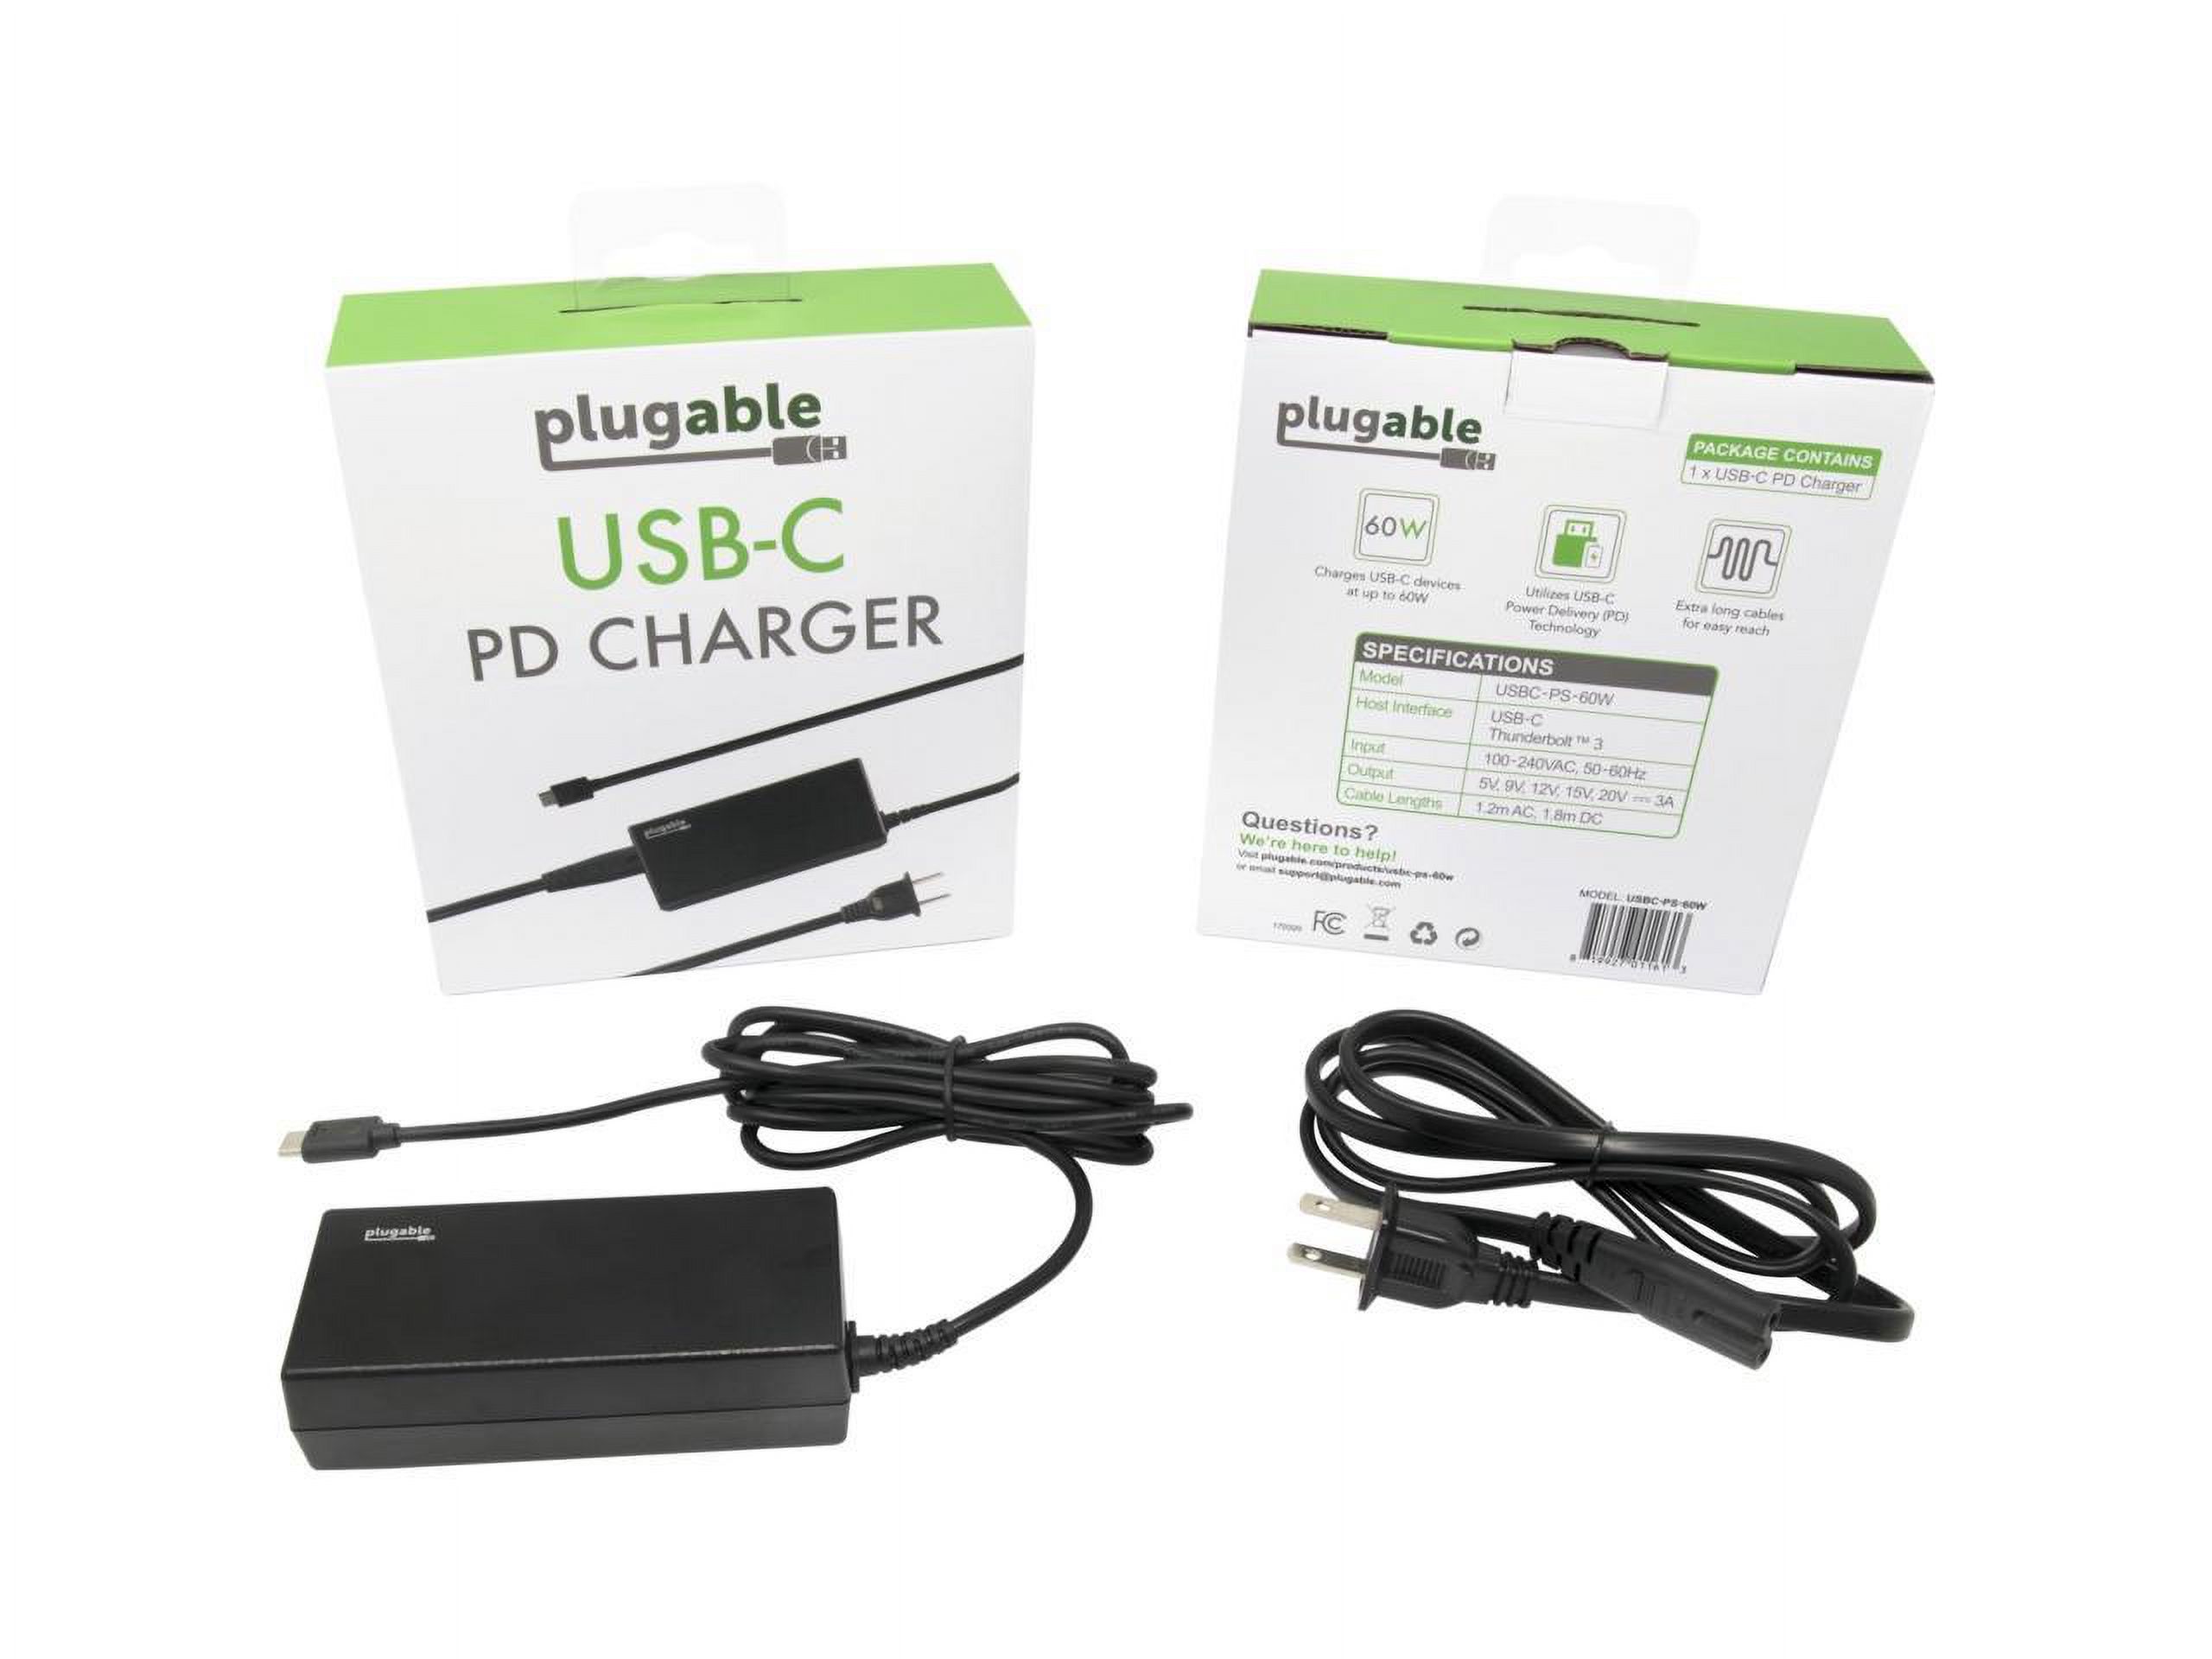 Plugable USB-C Chromebook Charger Replacement, 60W Type C Charger for Laptops, Compatible with USB-C Google Chromebooks including Samsung, HP, Dell, Lenovo, Acer, Asus - image 5 of 8